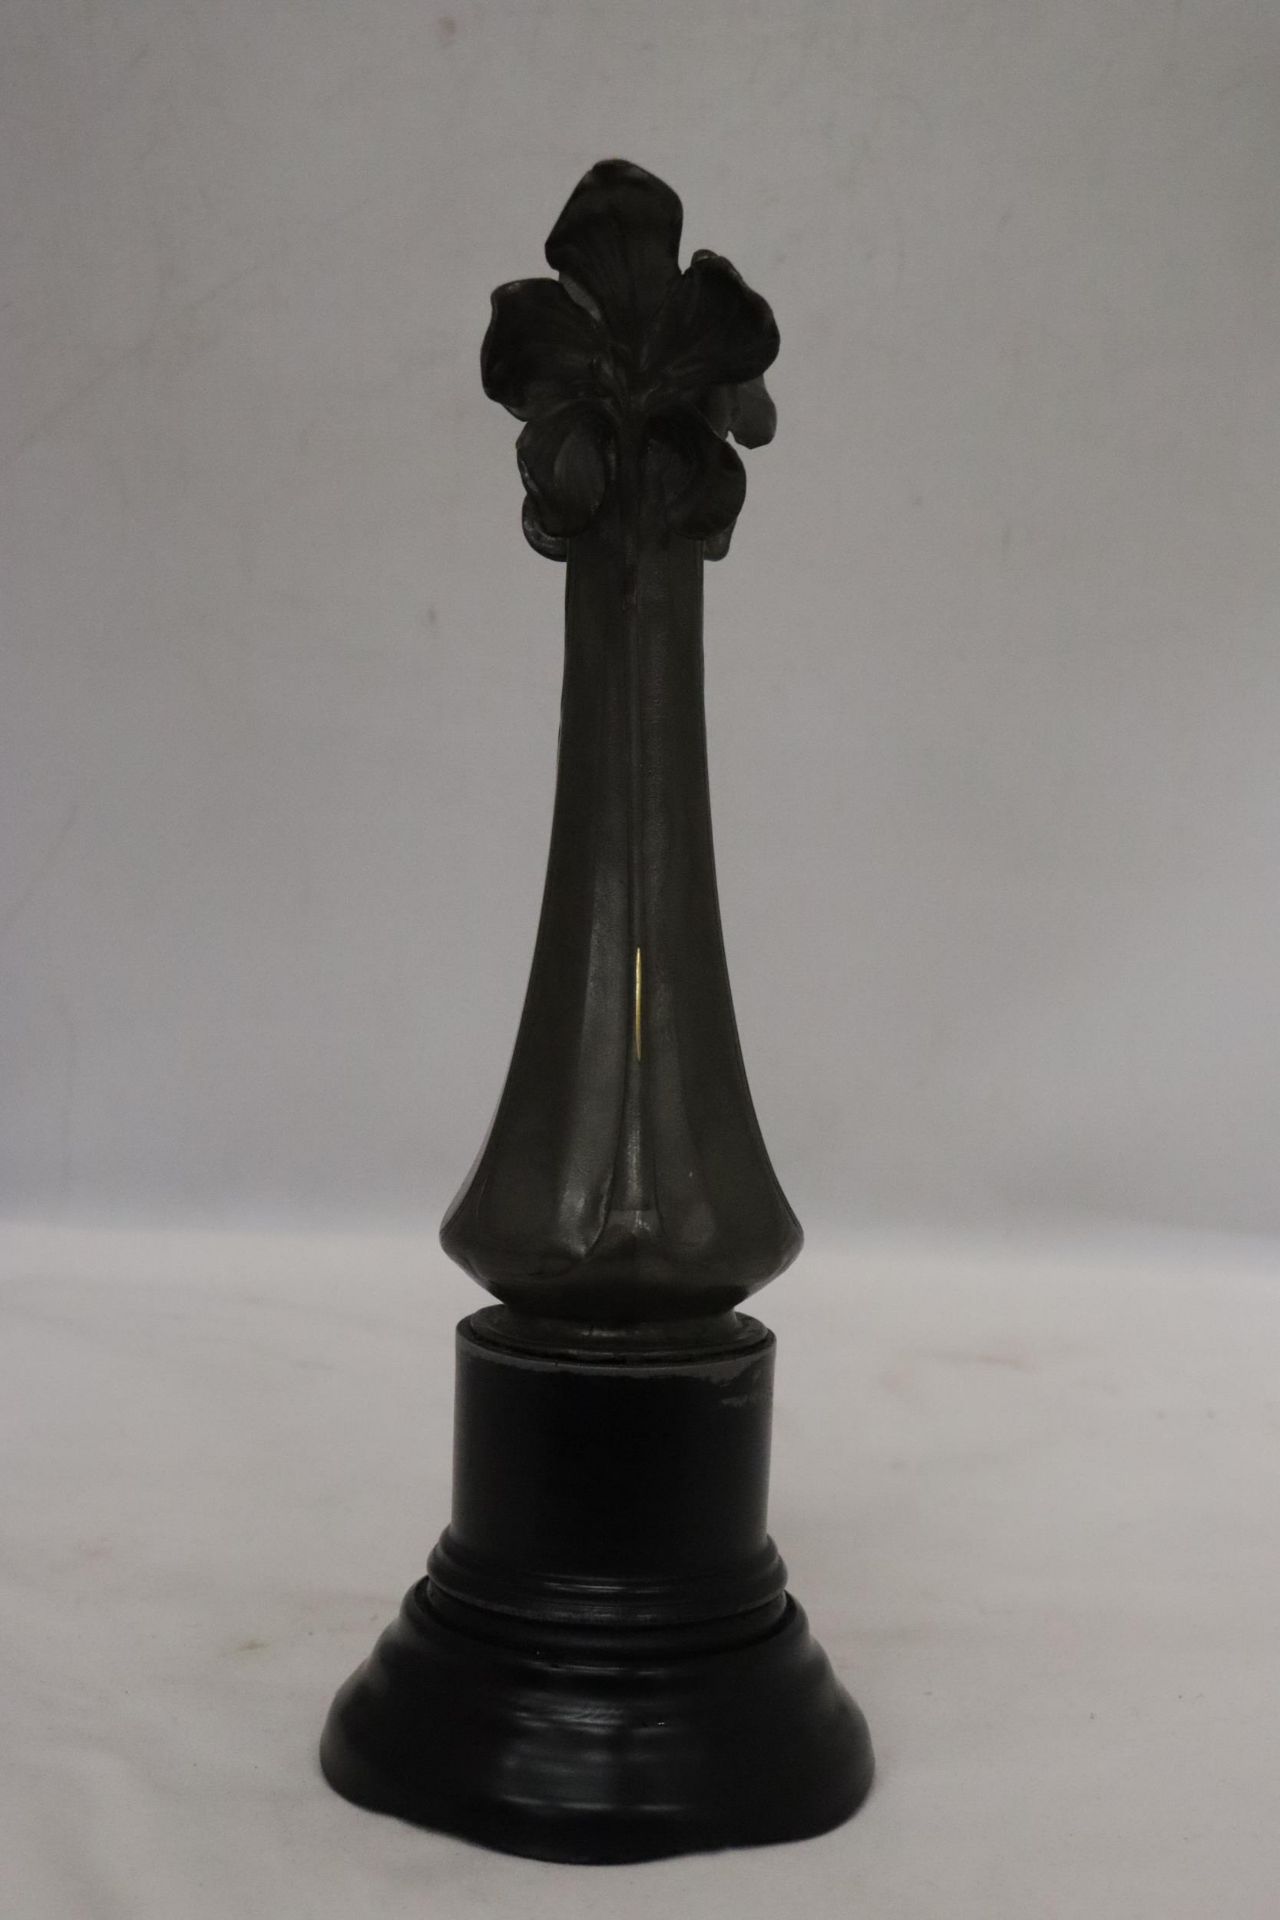 AN IMPERIAL ZINN B & G PEWTER VASE IN AN ART NOUVEAU STYLE - Image 4 of 8